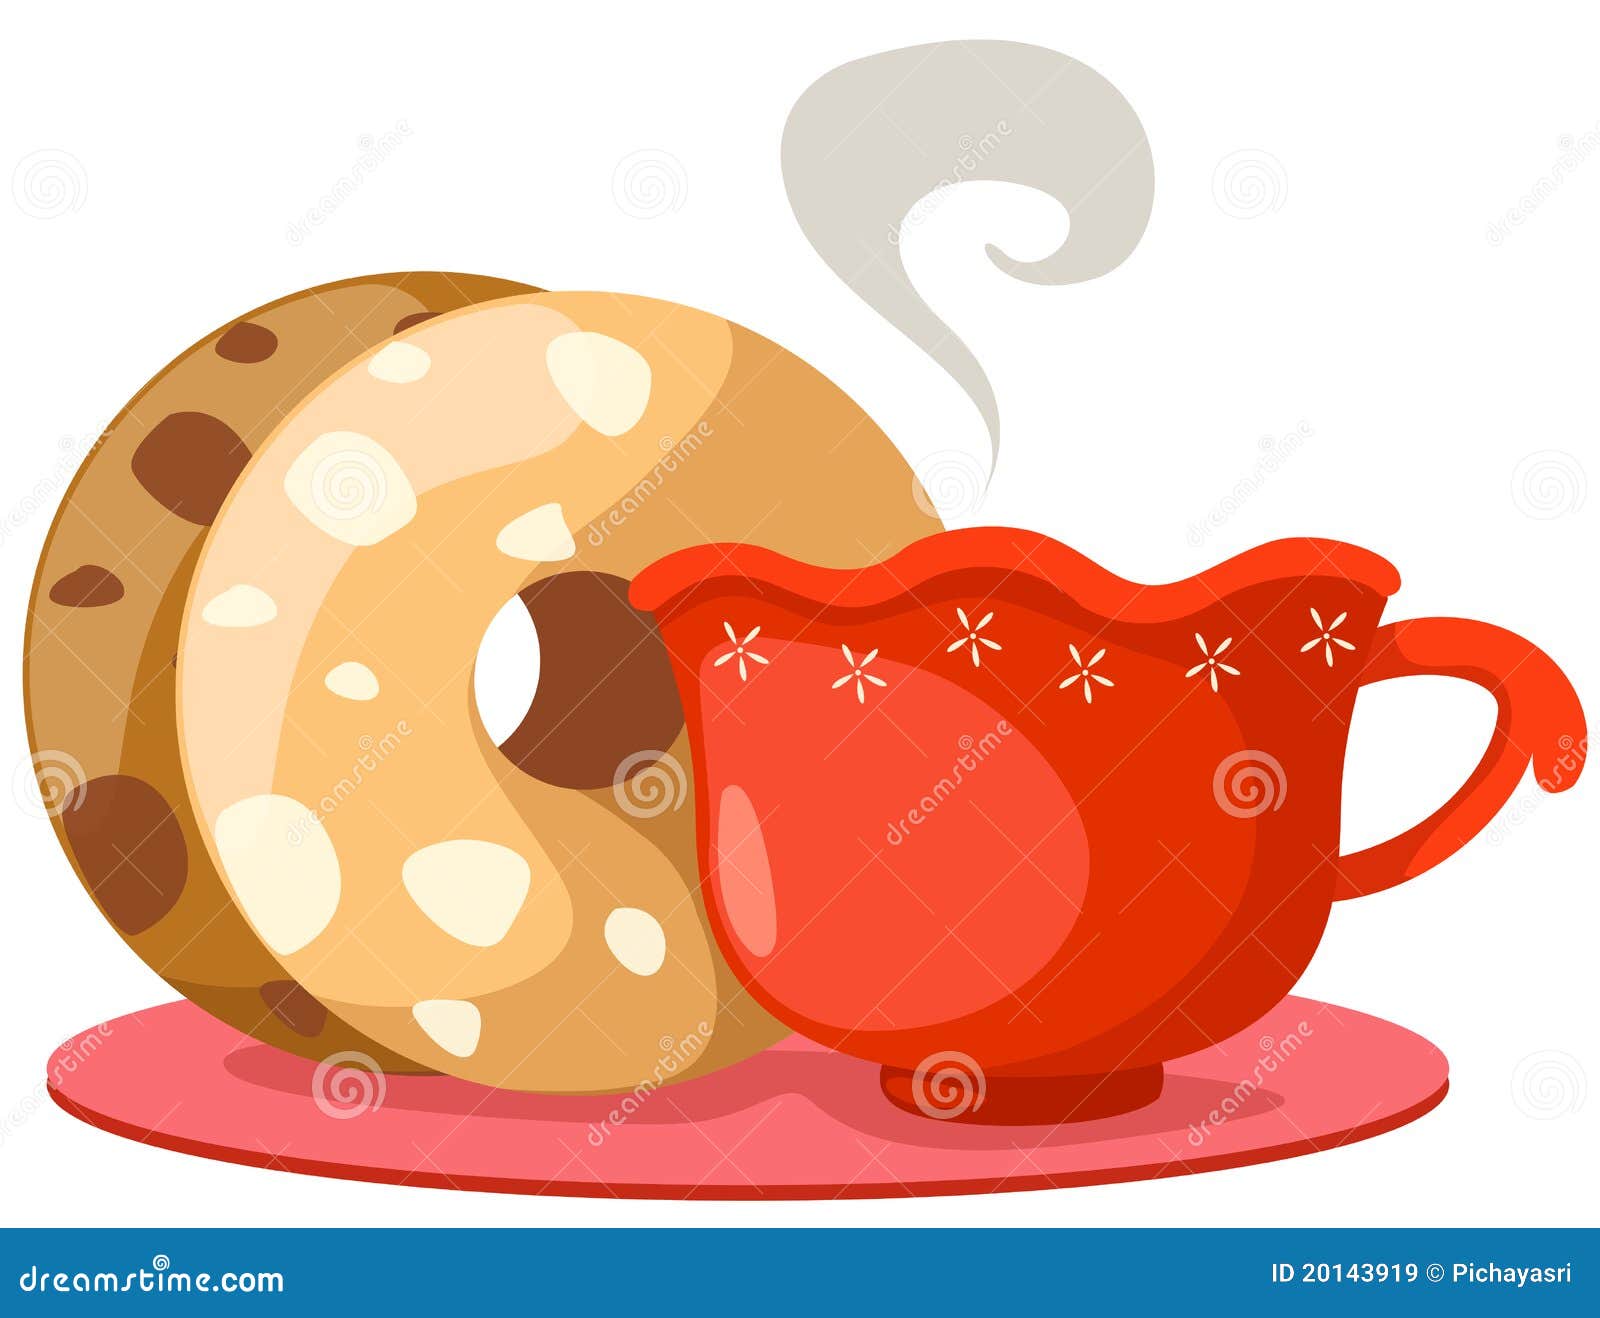 coffee and donuts clipart - photo #34